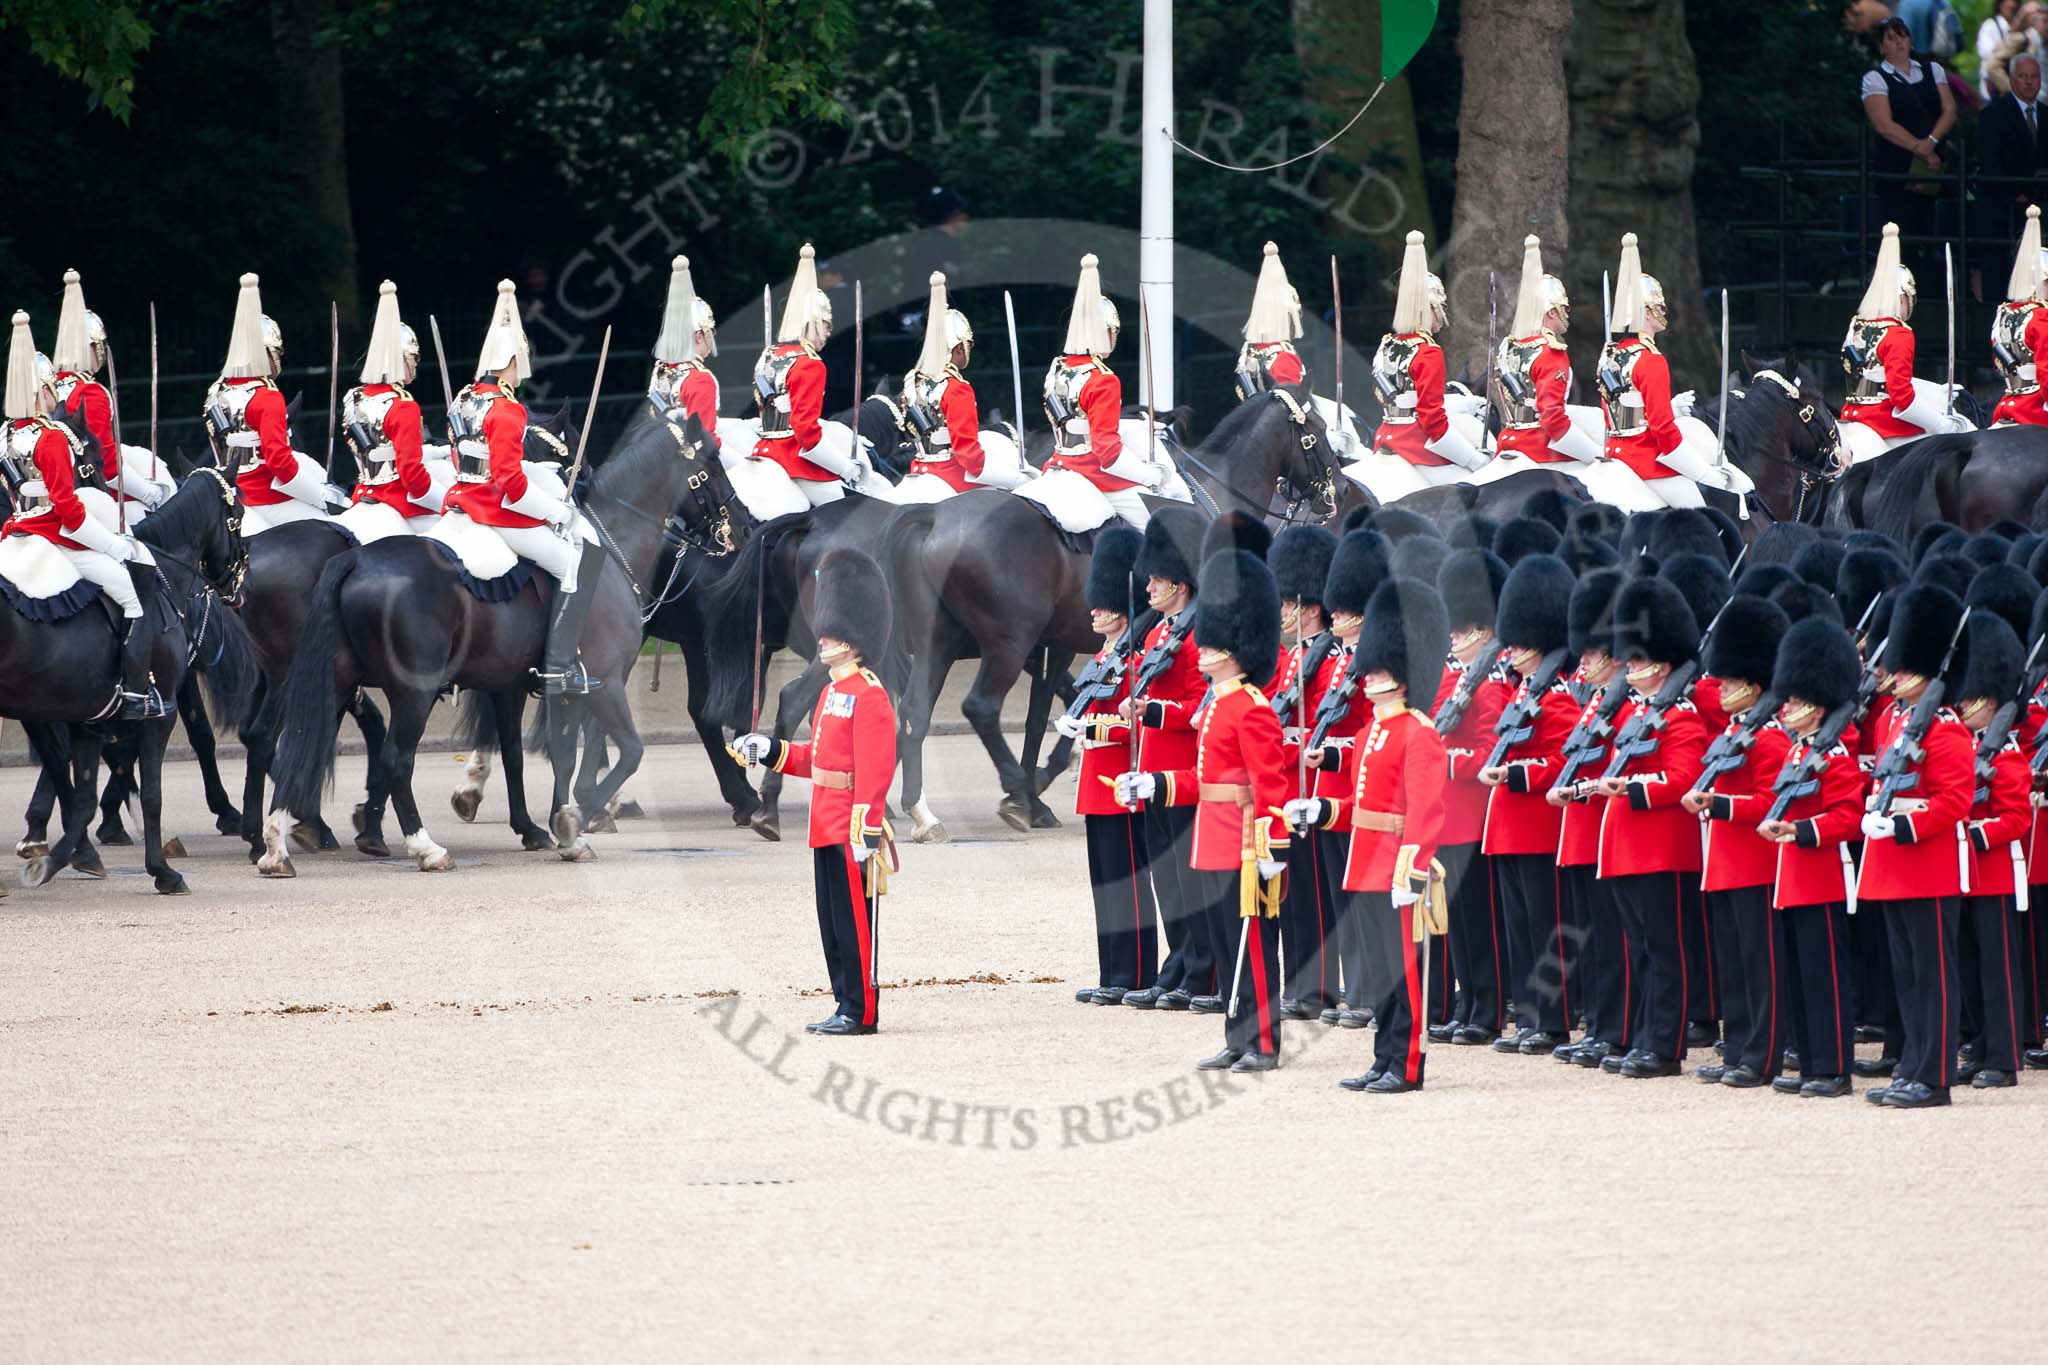 Trooping the Colour 2009: March Off - The Live Guards, Household Cavalry, leaving Horse Guards Parade towards The Mall..
Horse Guards Parade, Westminster,
London SW1,

United Kingdom,
on 13 June 2009 at 12:06, image #249